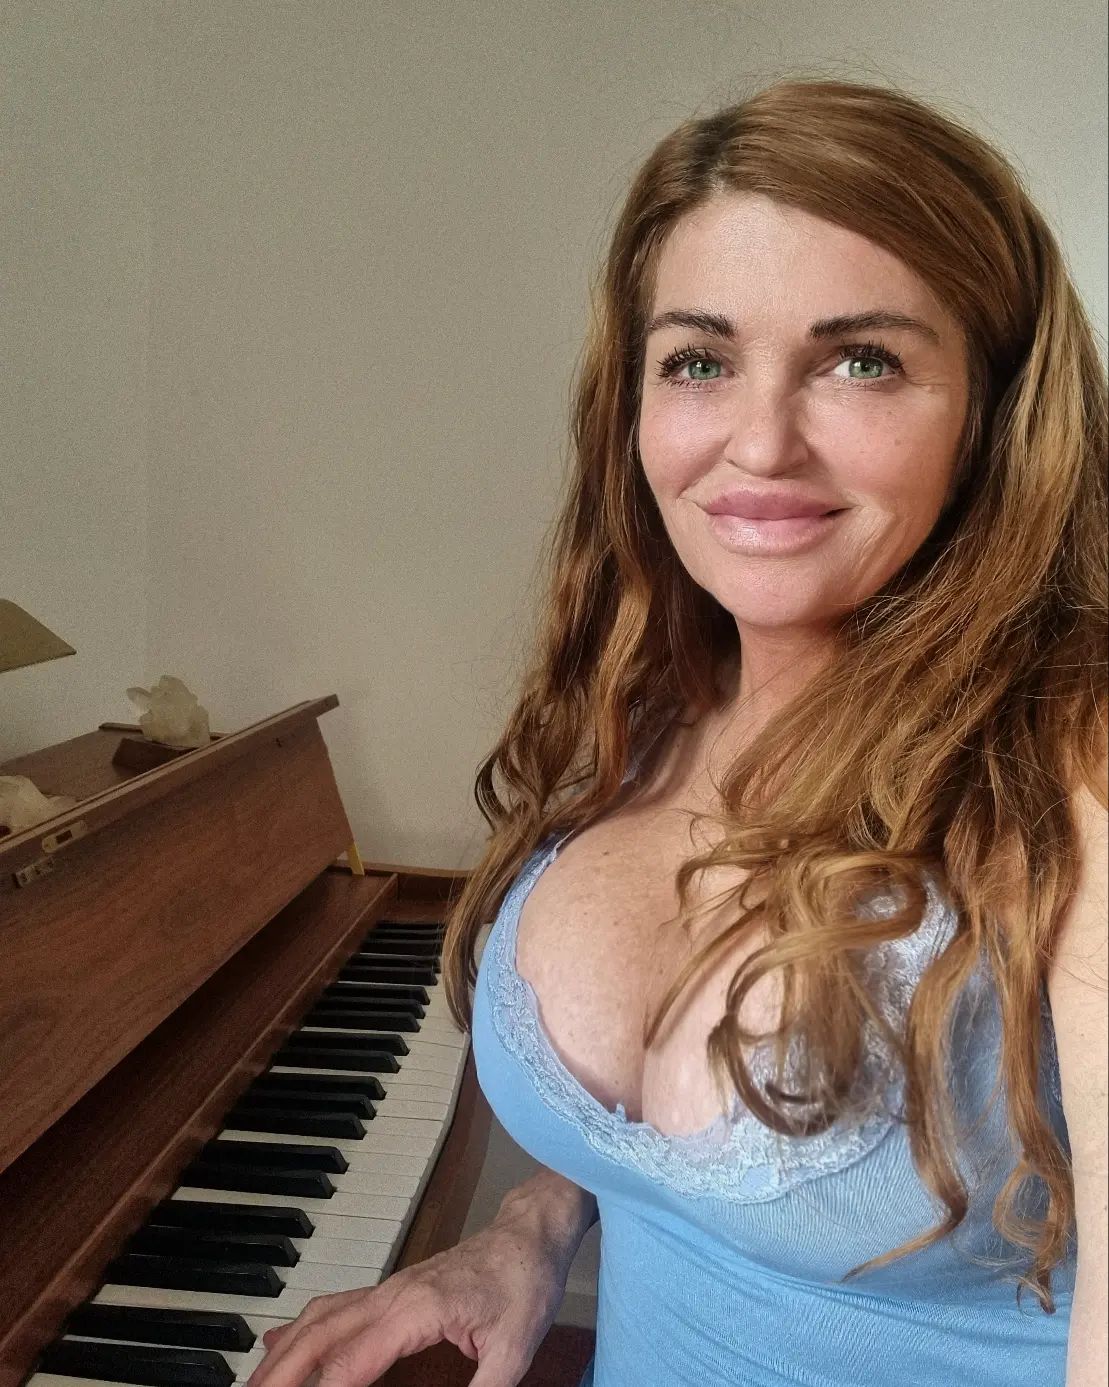 Dear humans, 
would any of you like to play the piano with me?
Kisses from Christina ❤️ 💋
.
.
.
.
.
.
.
.
.
.
.
.
#accountant #artist #author #bustywomen #beauty #bustygirls #beautifulgirlsofinstagram #bustymilf #cutegirl #curvygirl #christinagoldielocks #cutegirlsofinstagram #cougartown #cougarnation #cougar #cougarlife #milfmom #milf #milflovers #milfgang #milfstatus #onlyfansmodel #onlyfansgirl #onlyhands #onlyhands #piano